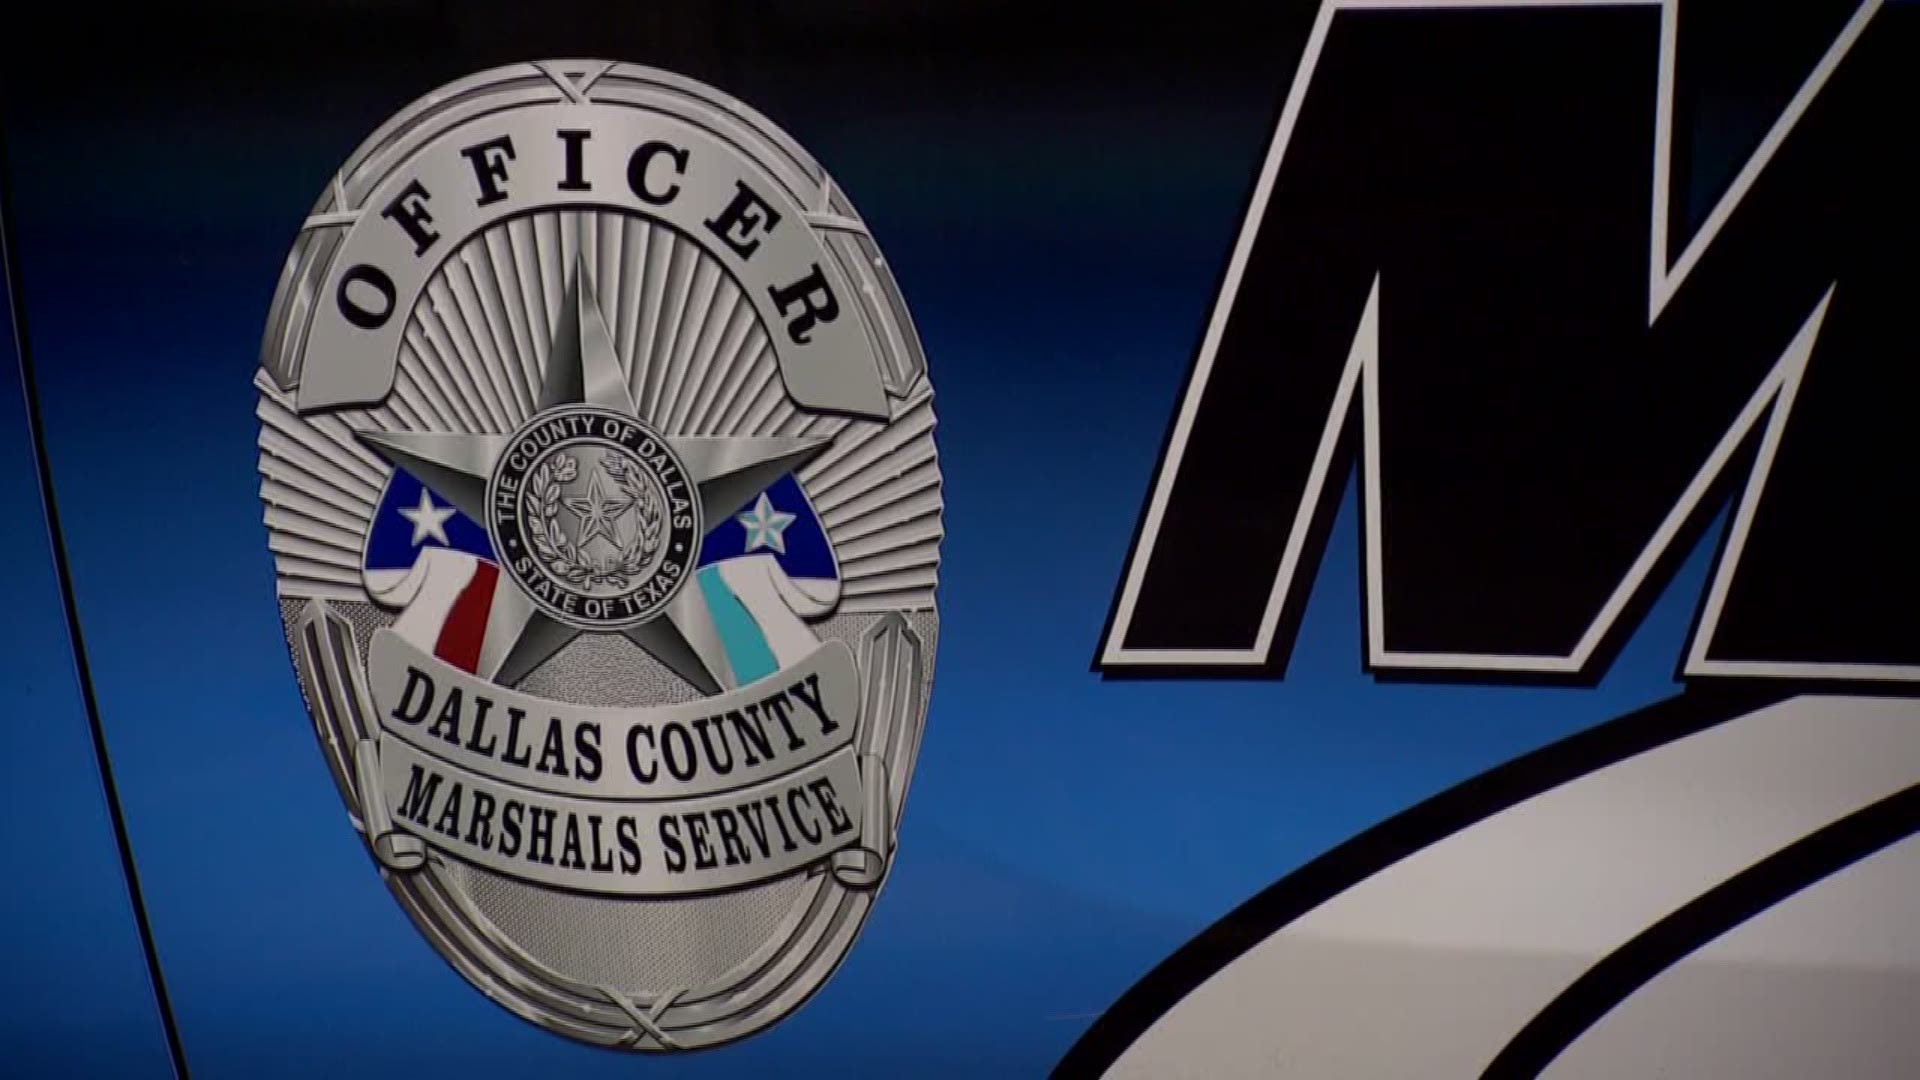 Marshals fired after misconduct investigation